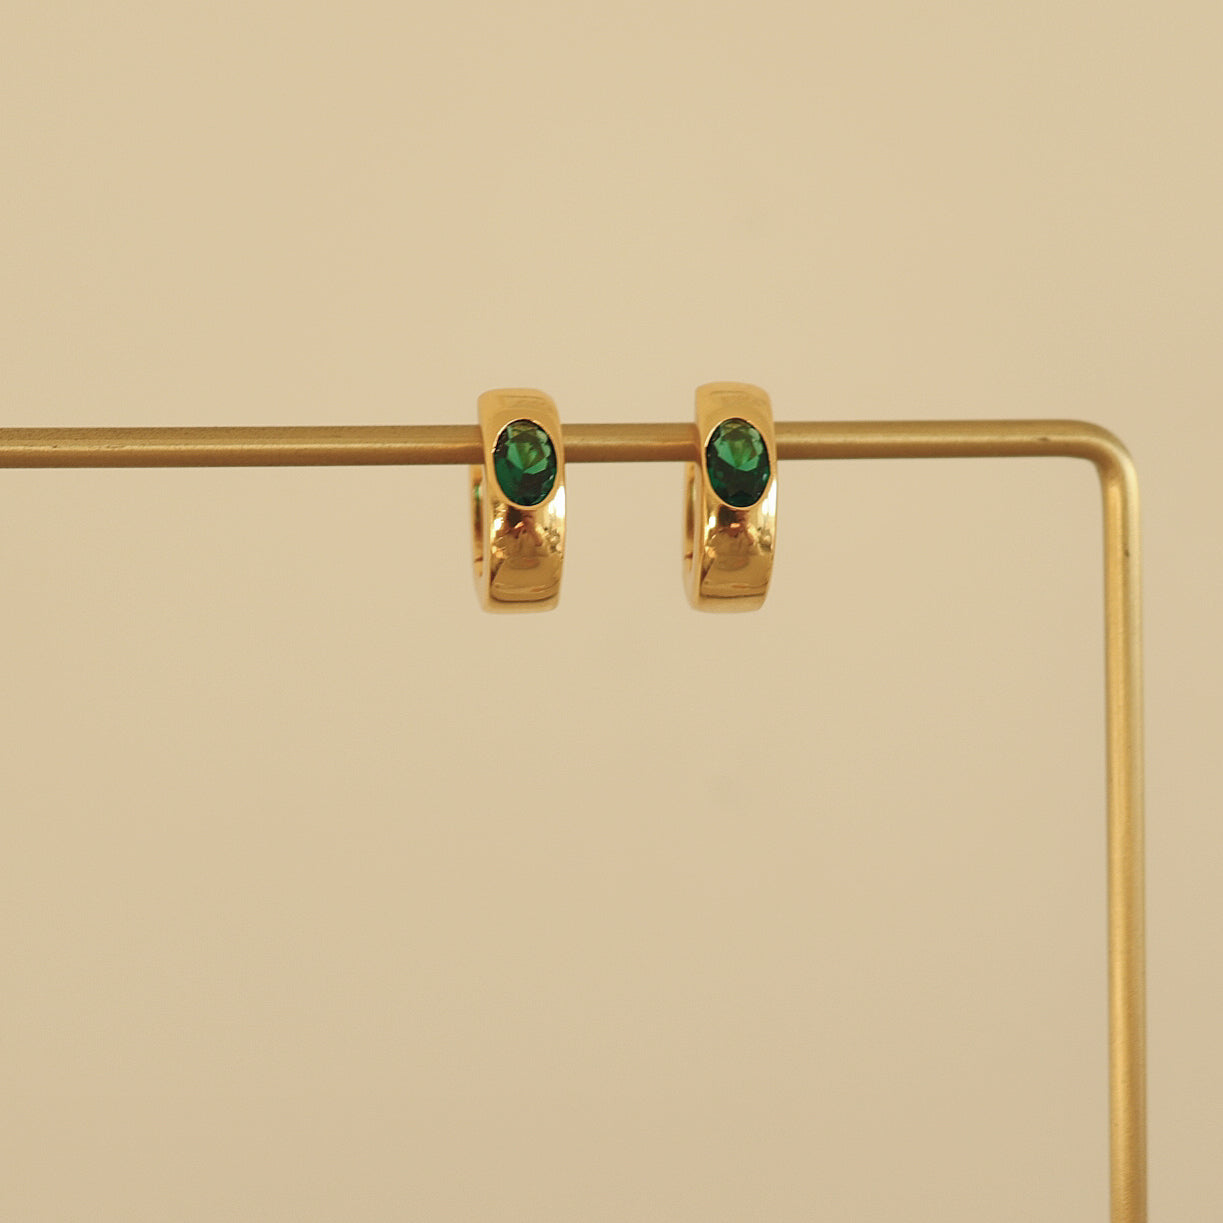 Everyday Glamour: Gold Plated Emerald Green Zircon Statement earringsEveryday Glamour: Gold Plated Emerald Green Zircon Statement earrings